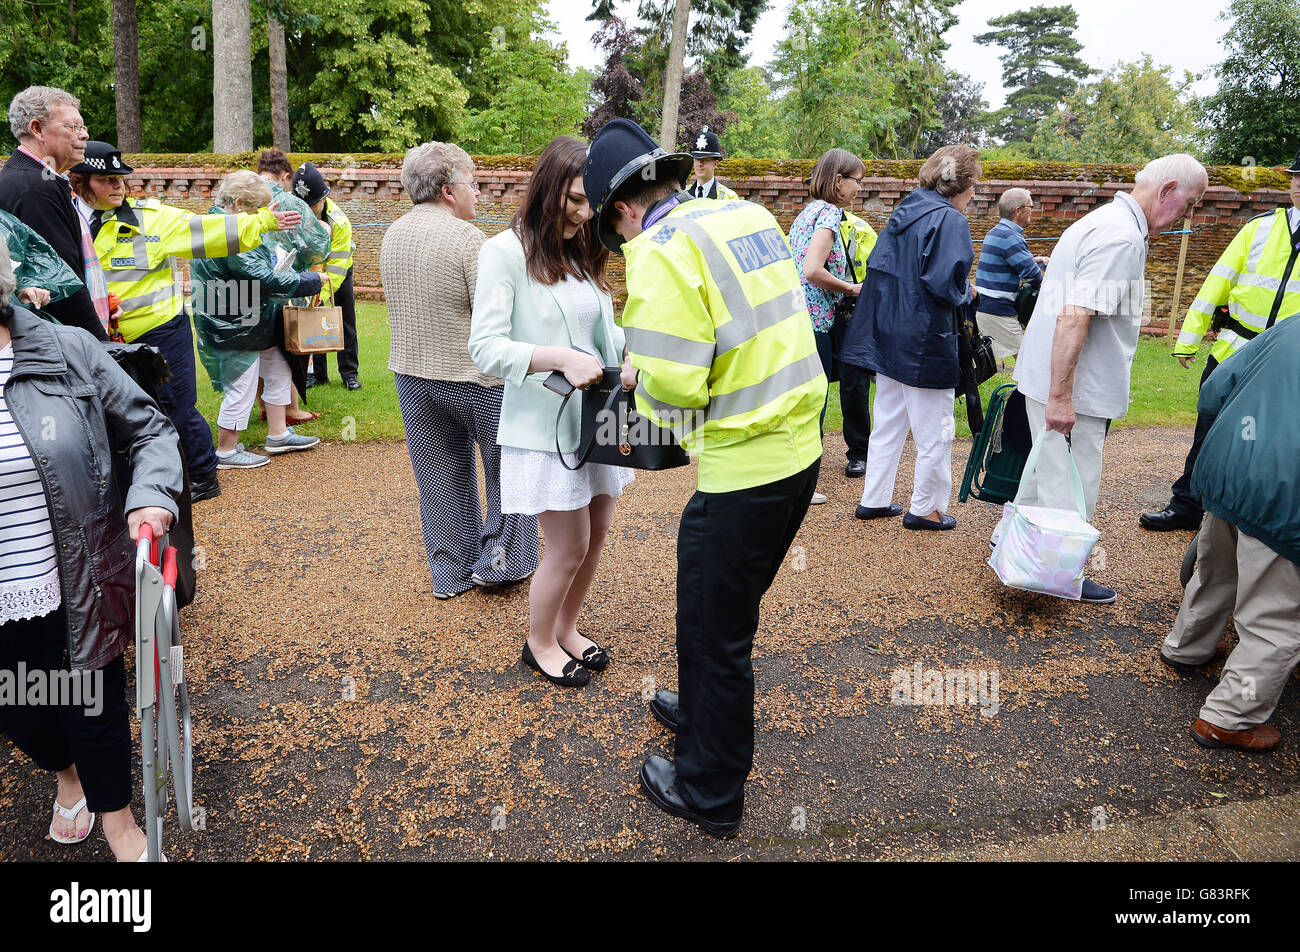 A large crowd of loyal royal fans pass through security to the area around the Church of St Mary Magdalene in Sandringham, Norfolk, as Princess Charlotte will be christened in front of the Queen and close family. Stock Photo